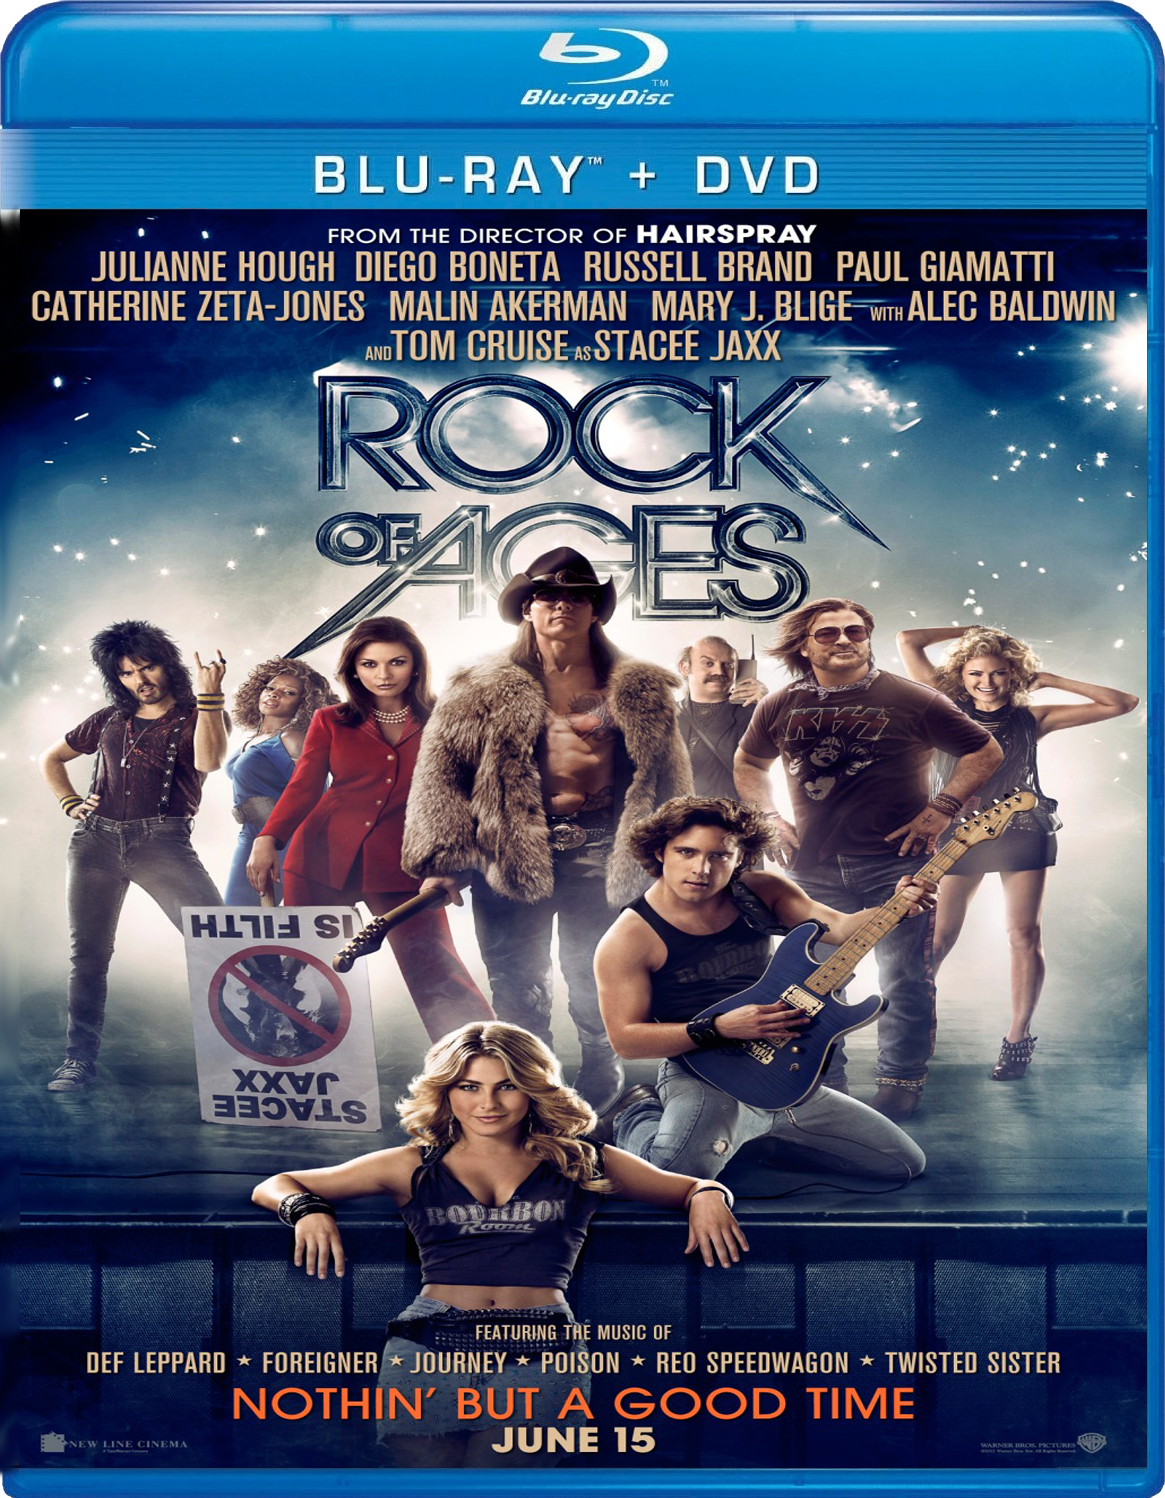 Rock of ages 2012 poster. Rock of ages 2012 IMDB posters.